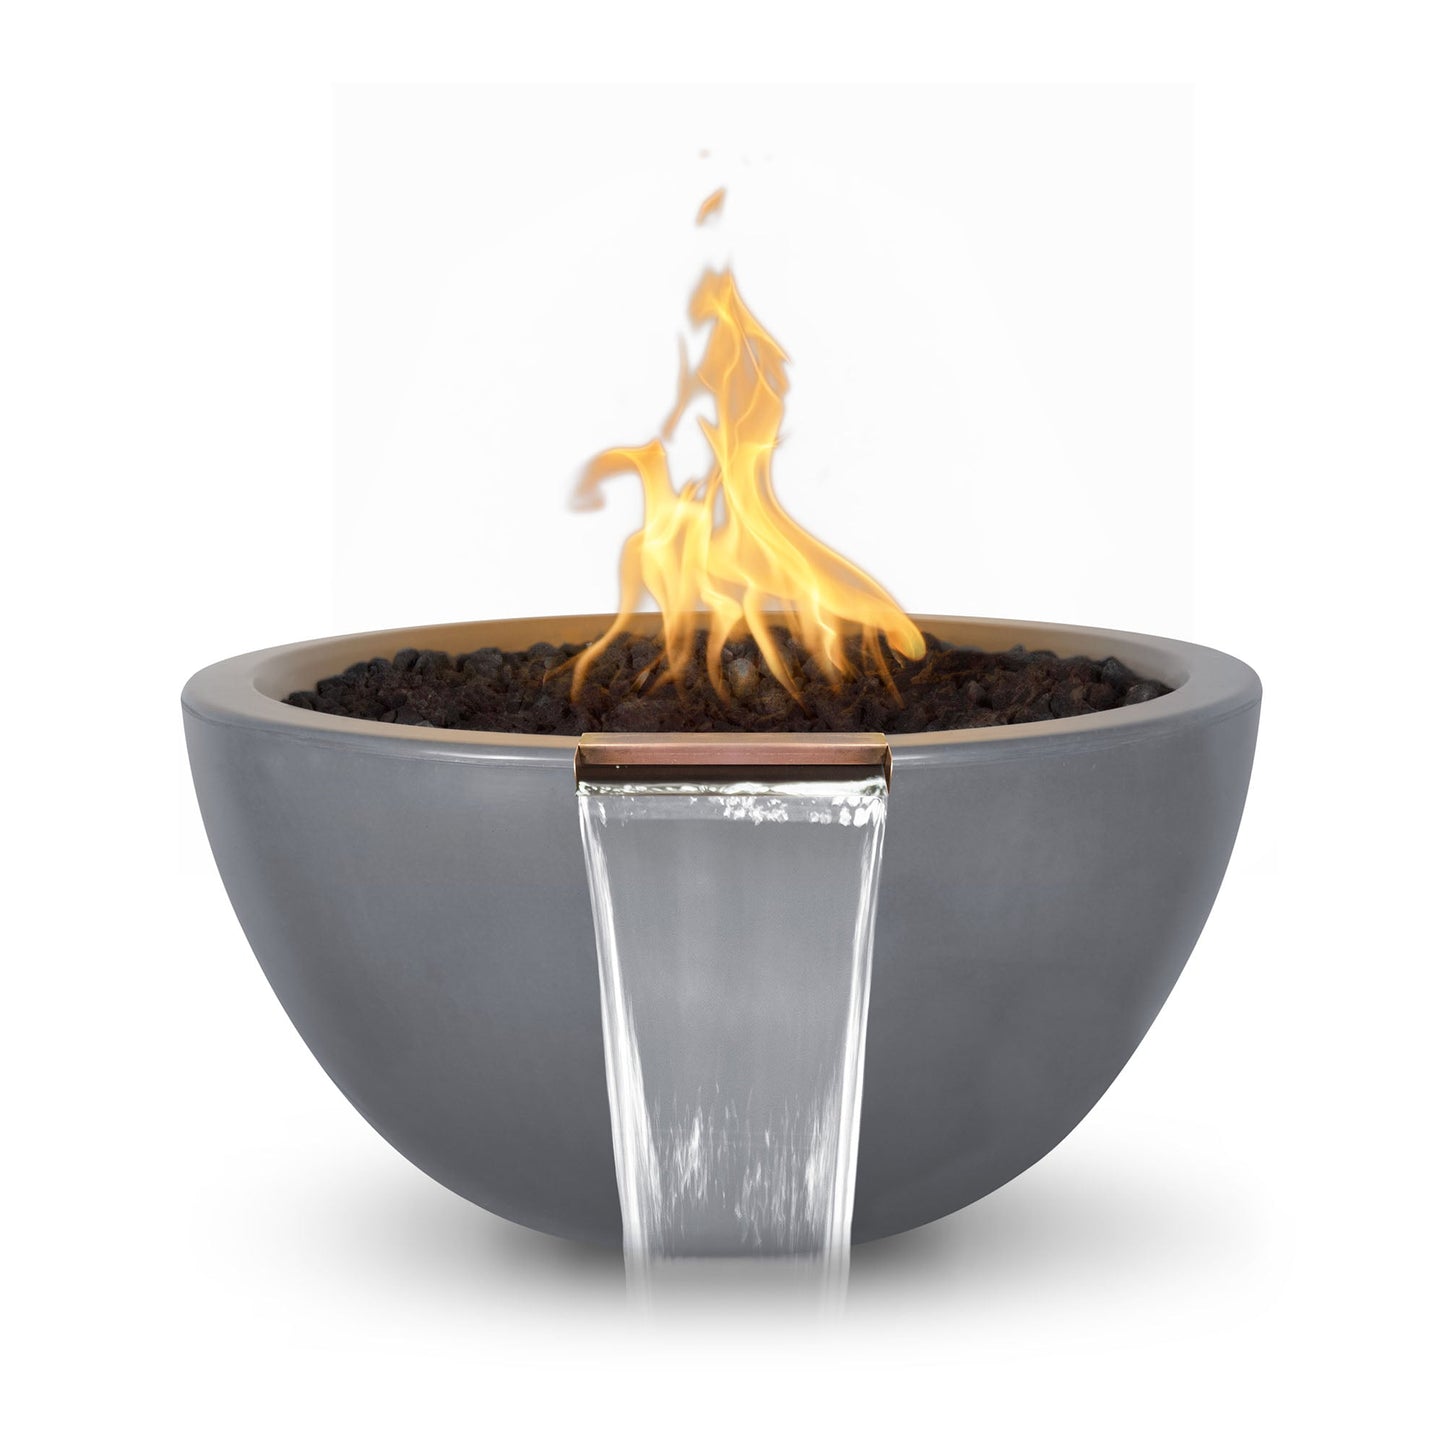 The Outdoor Plus Round Luna 30" Vanilla GFRC Concrete Natural Gas Fire & Water Bowl with Match Lit with Flame Sense Ignition